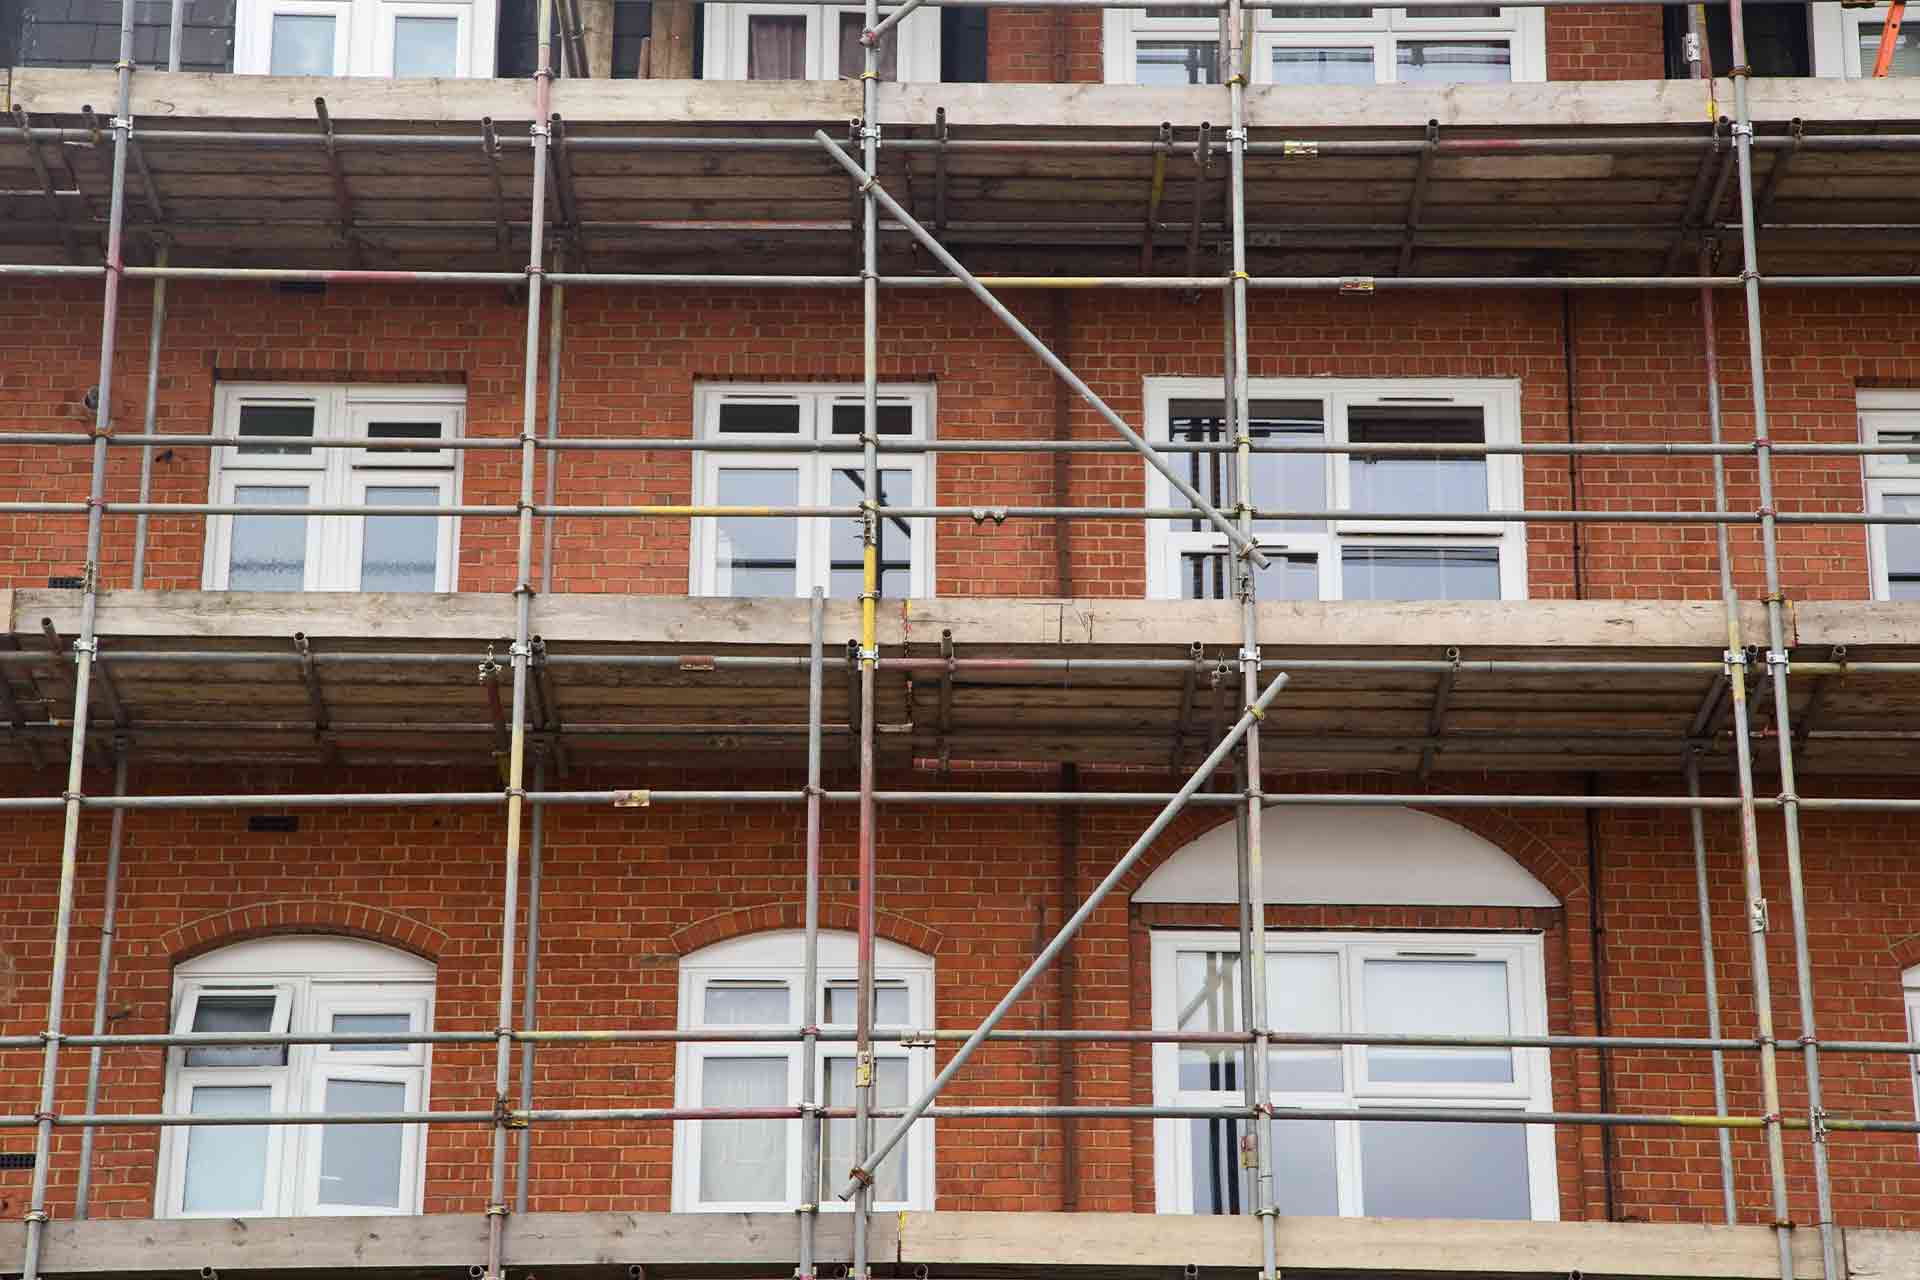 Scaffolding Hire Services Makes Repair Work Easy